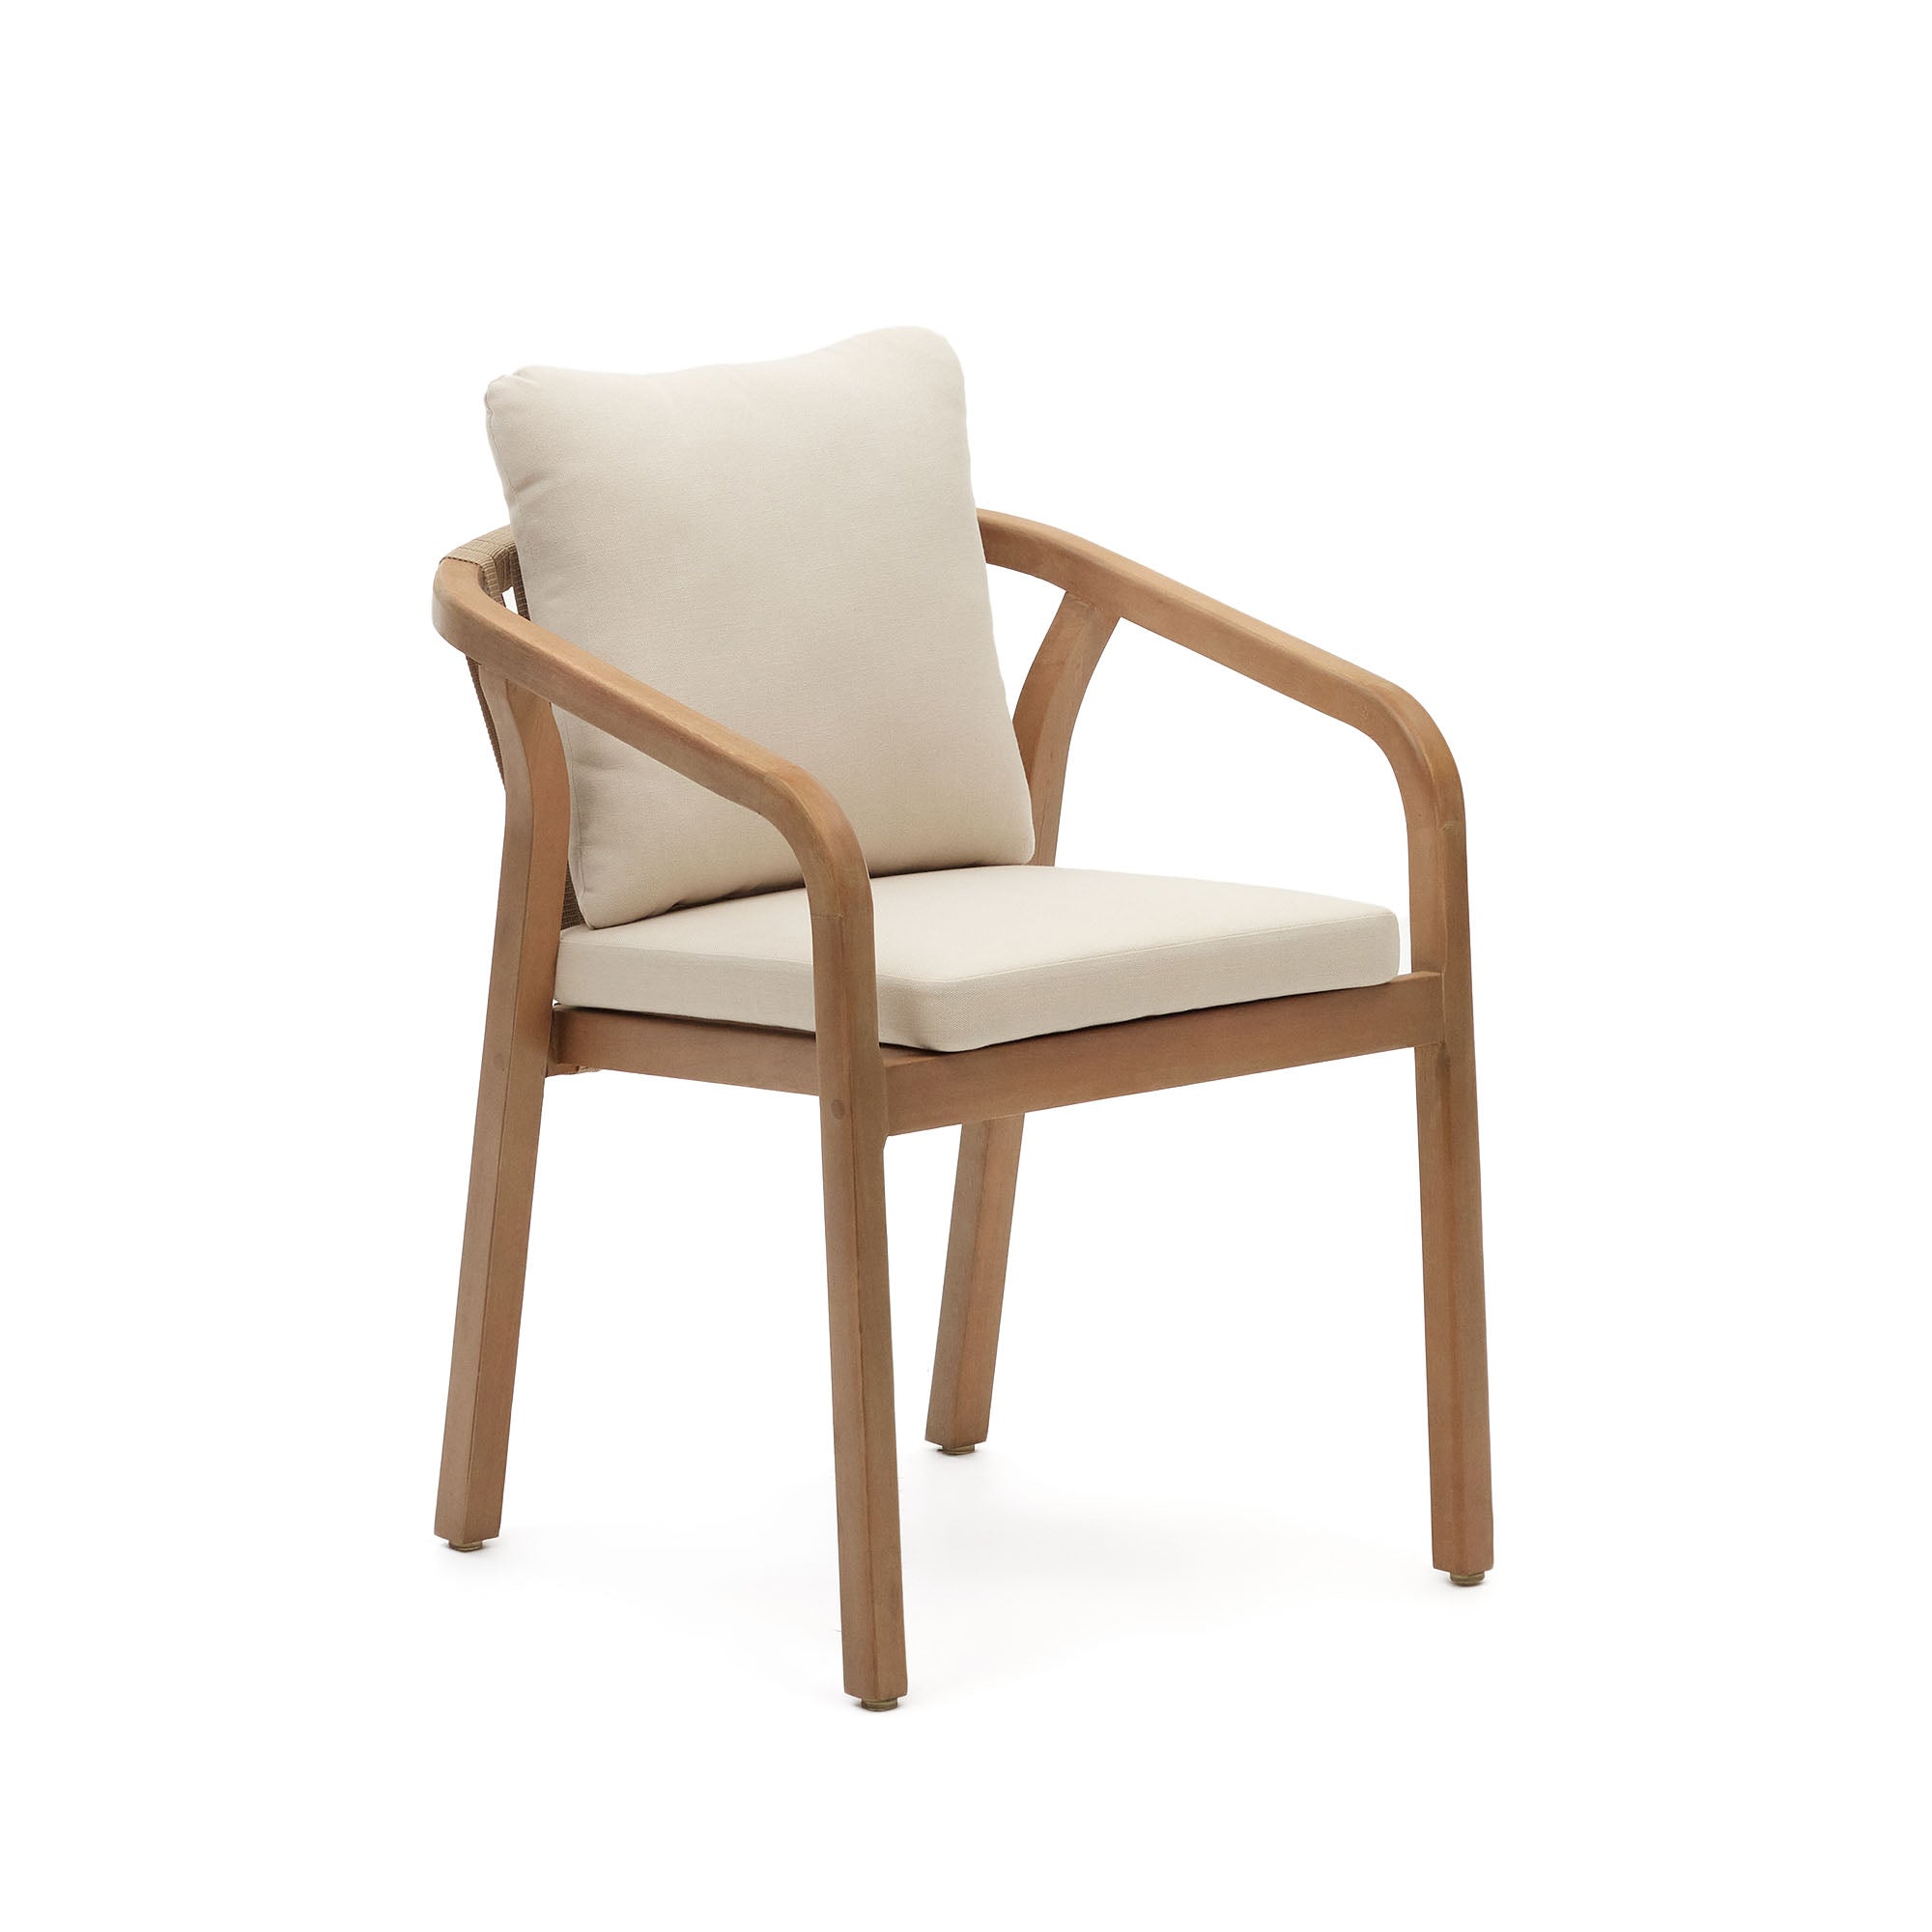 Malaret stackable chair in solid eucalyptus and beige cord, FSC